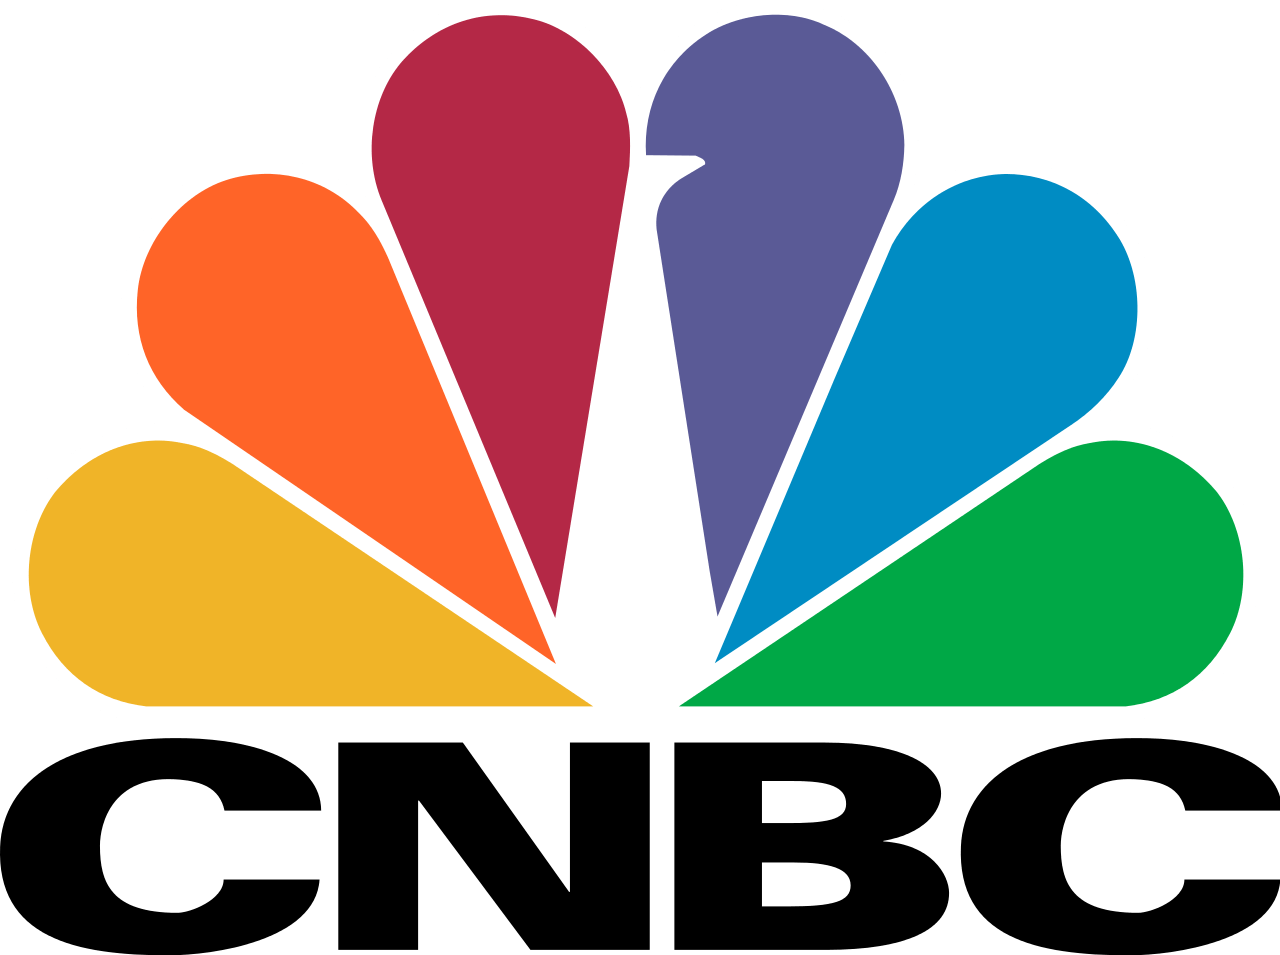 CNBC Peacock logo on transparent background.